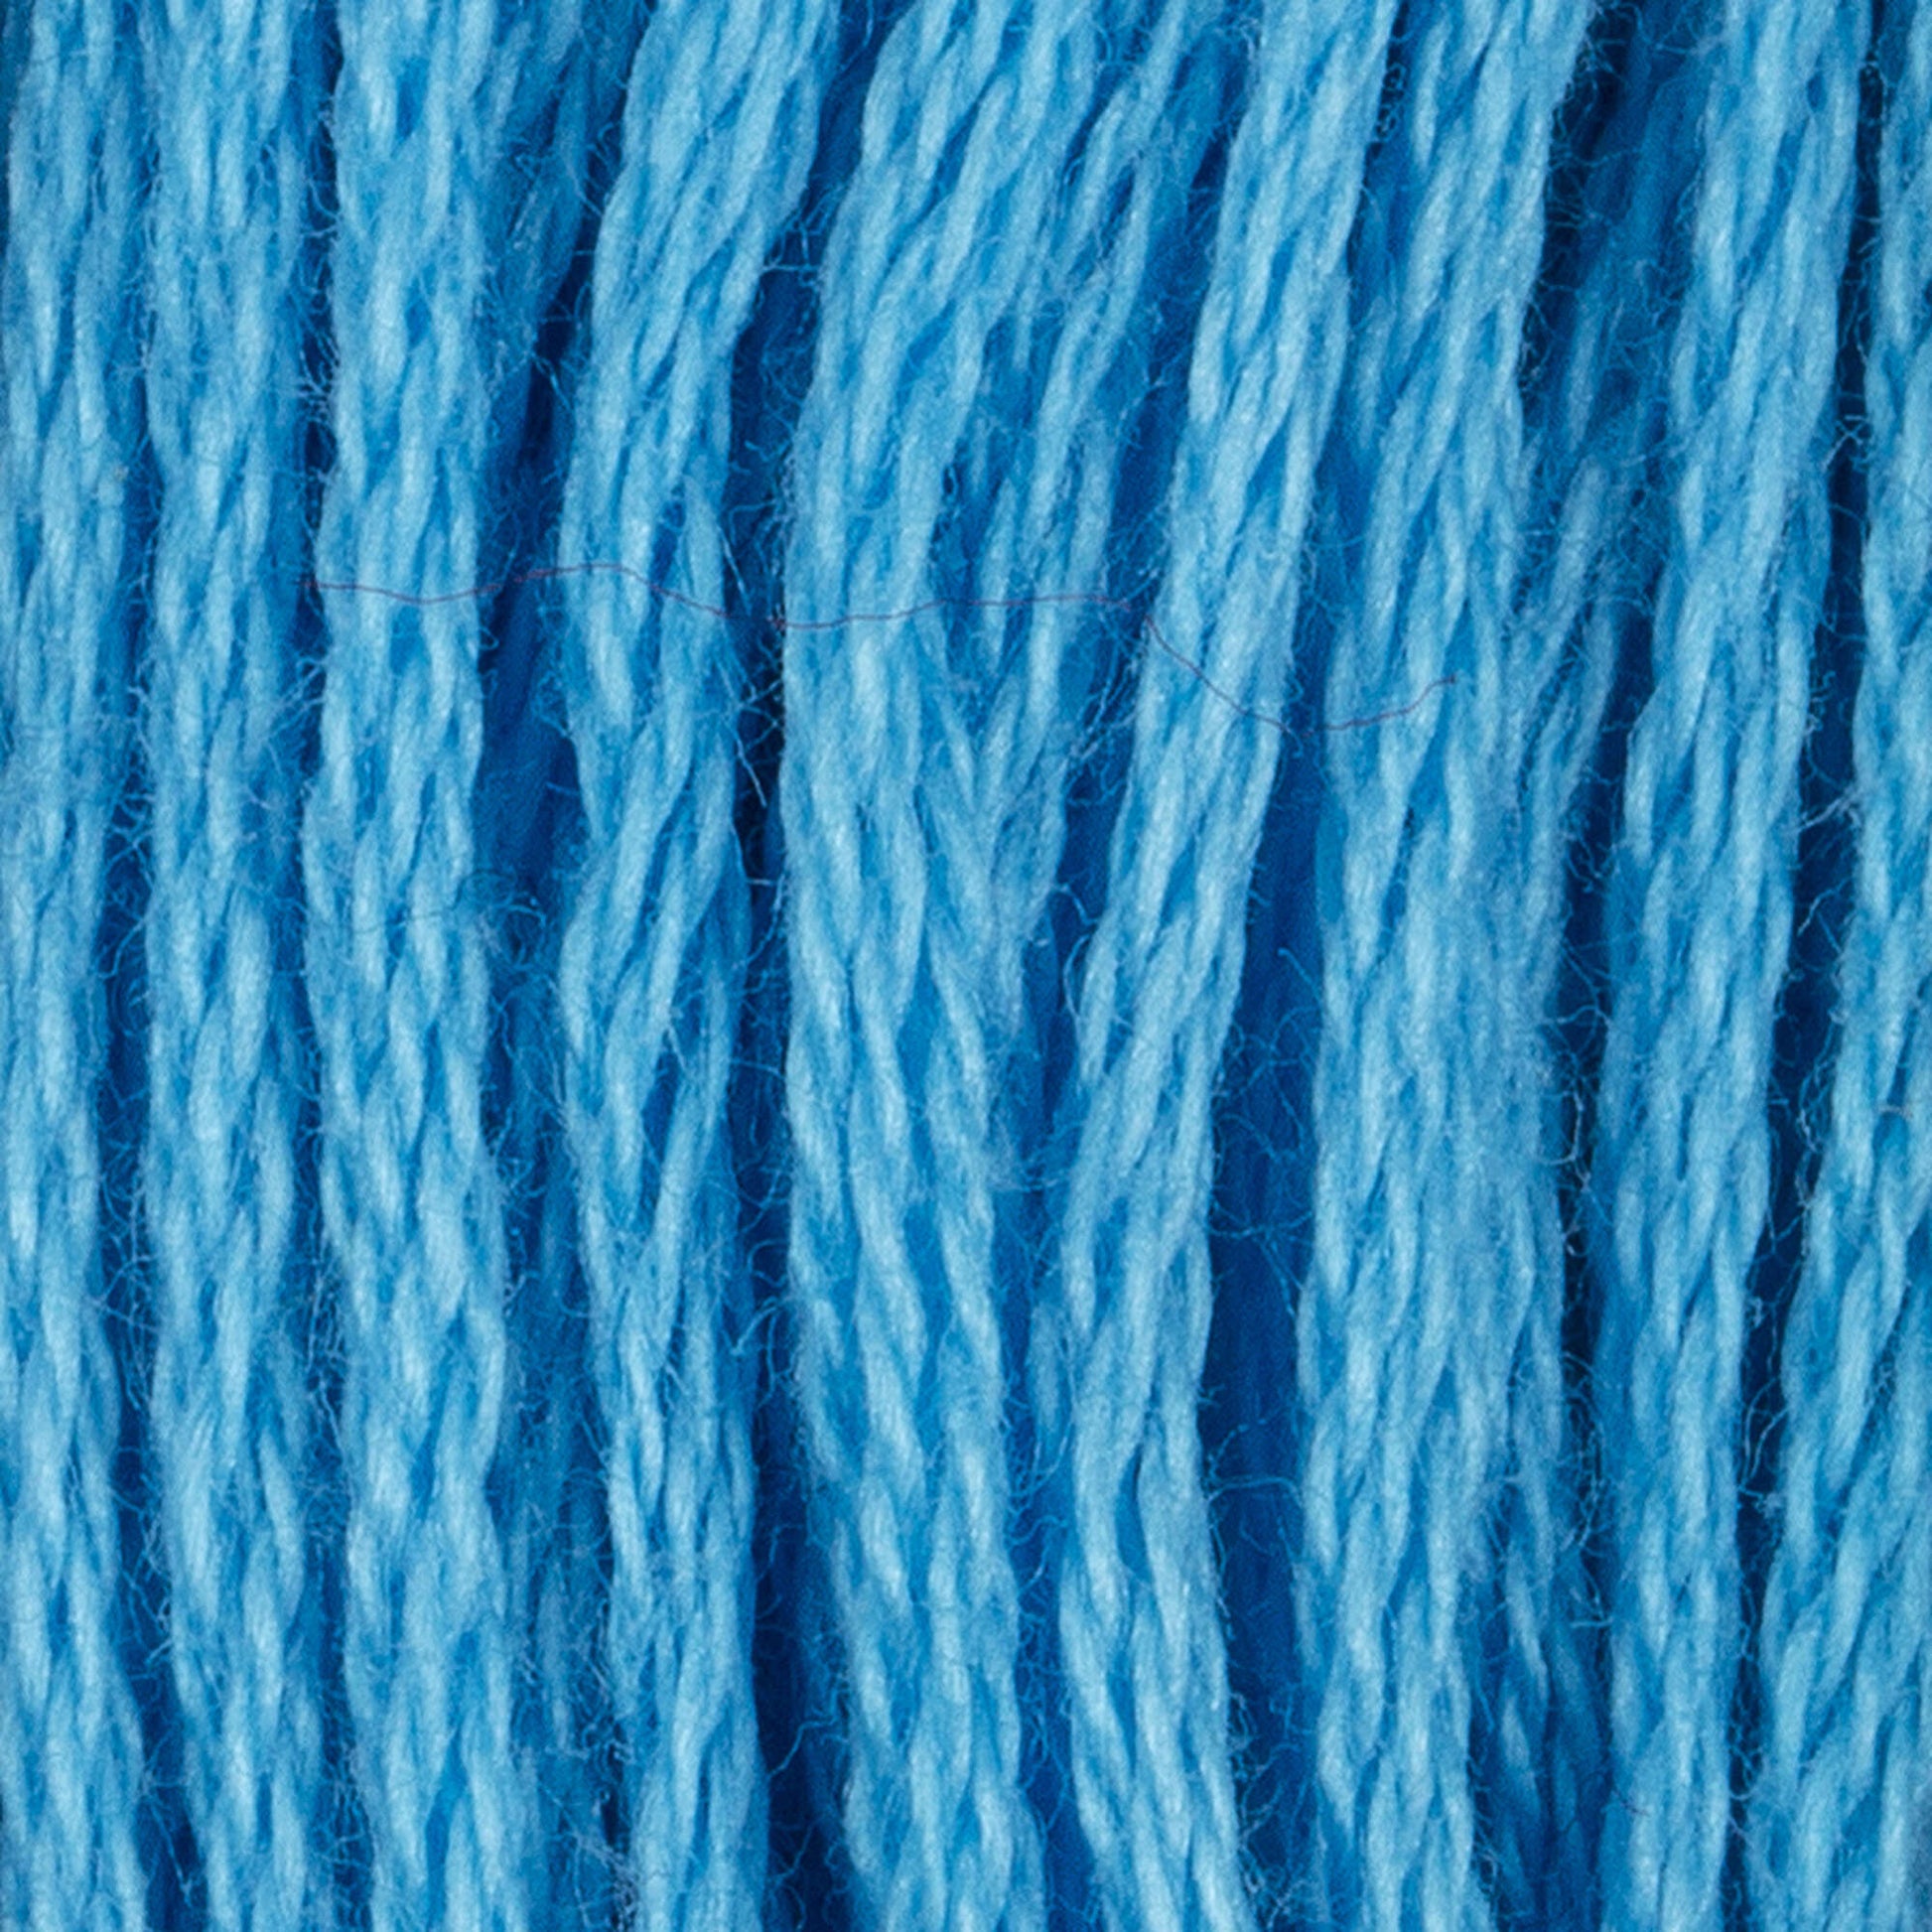 Coats & Clark Cotton Embroidery Floss Imperial Blue Light